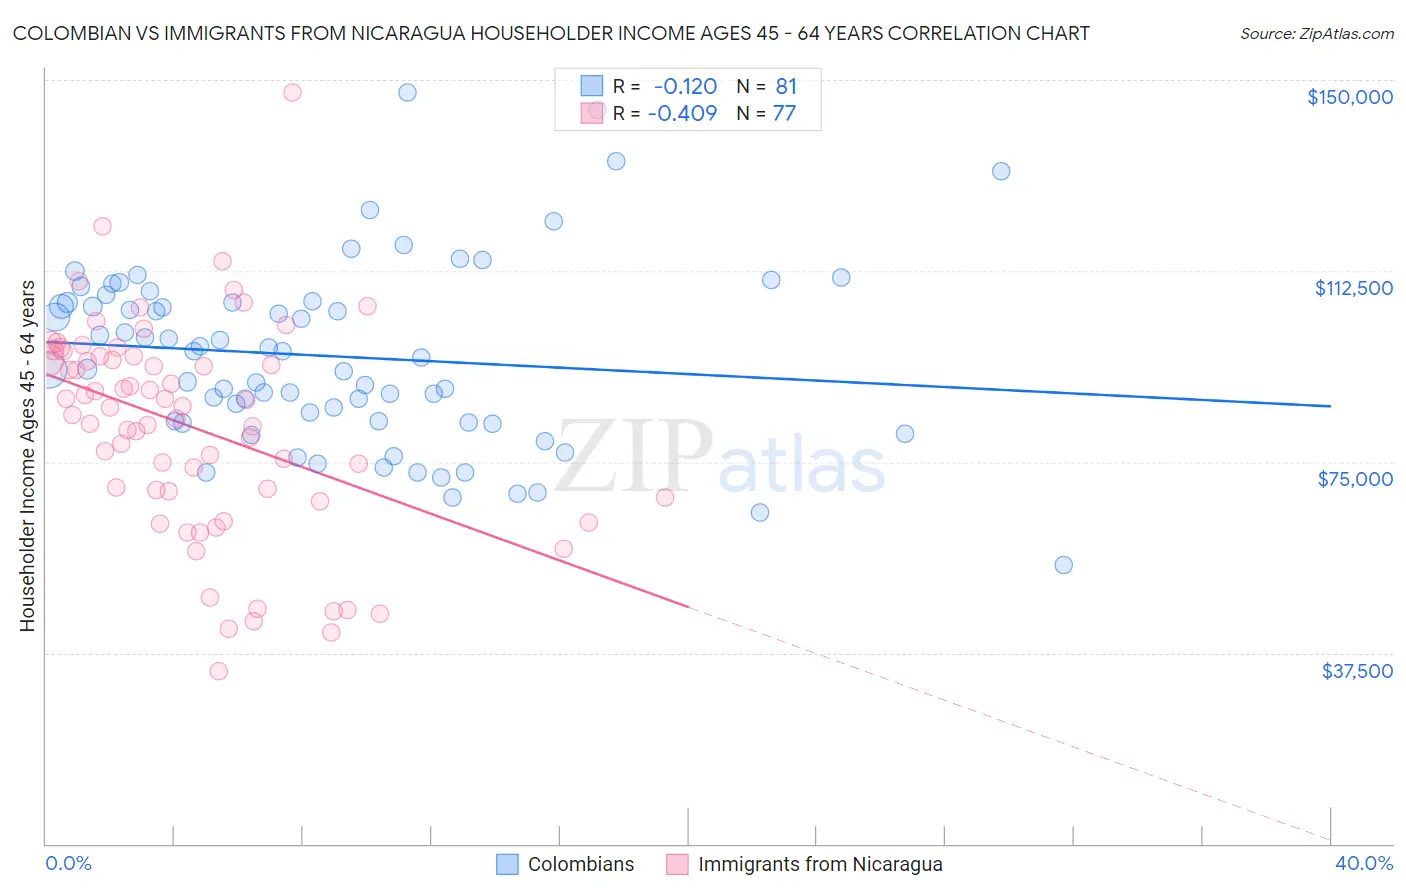 Colombian vs Immigrants from Nicaragua Householder Income Ages 45 - 64 years